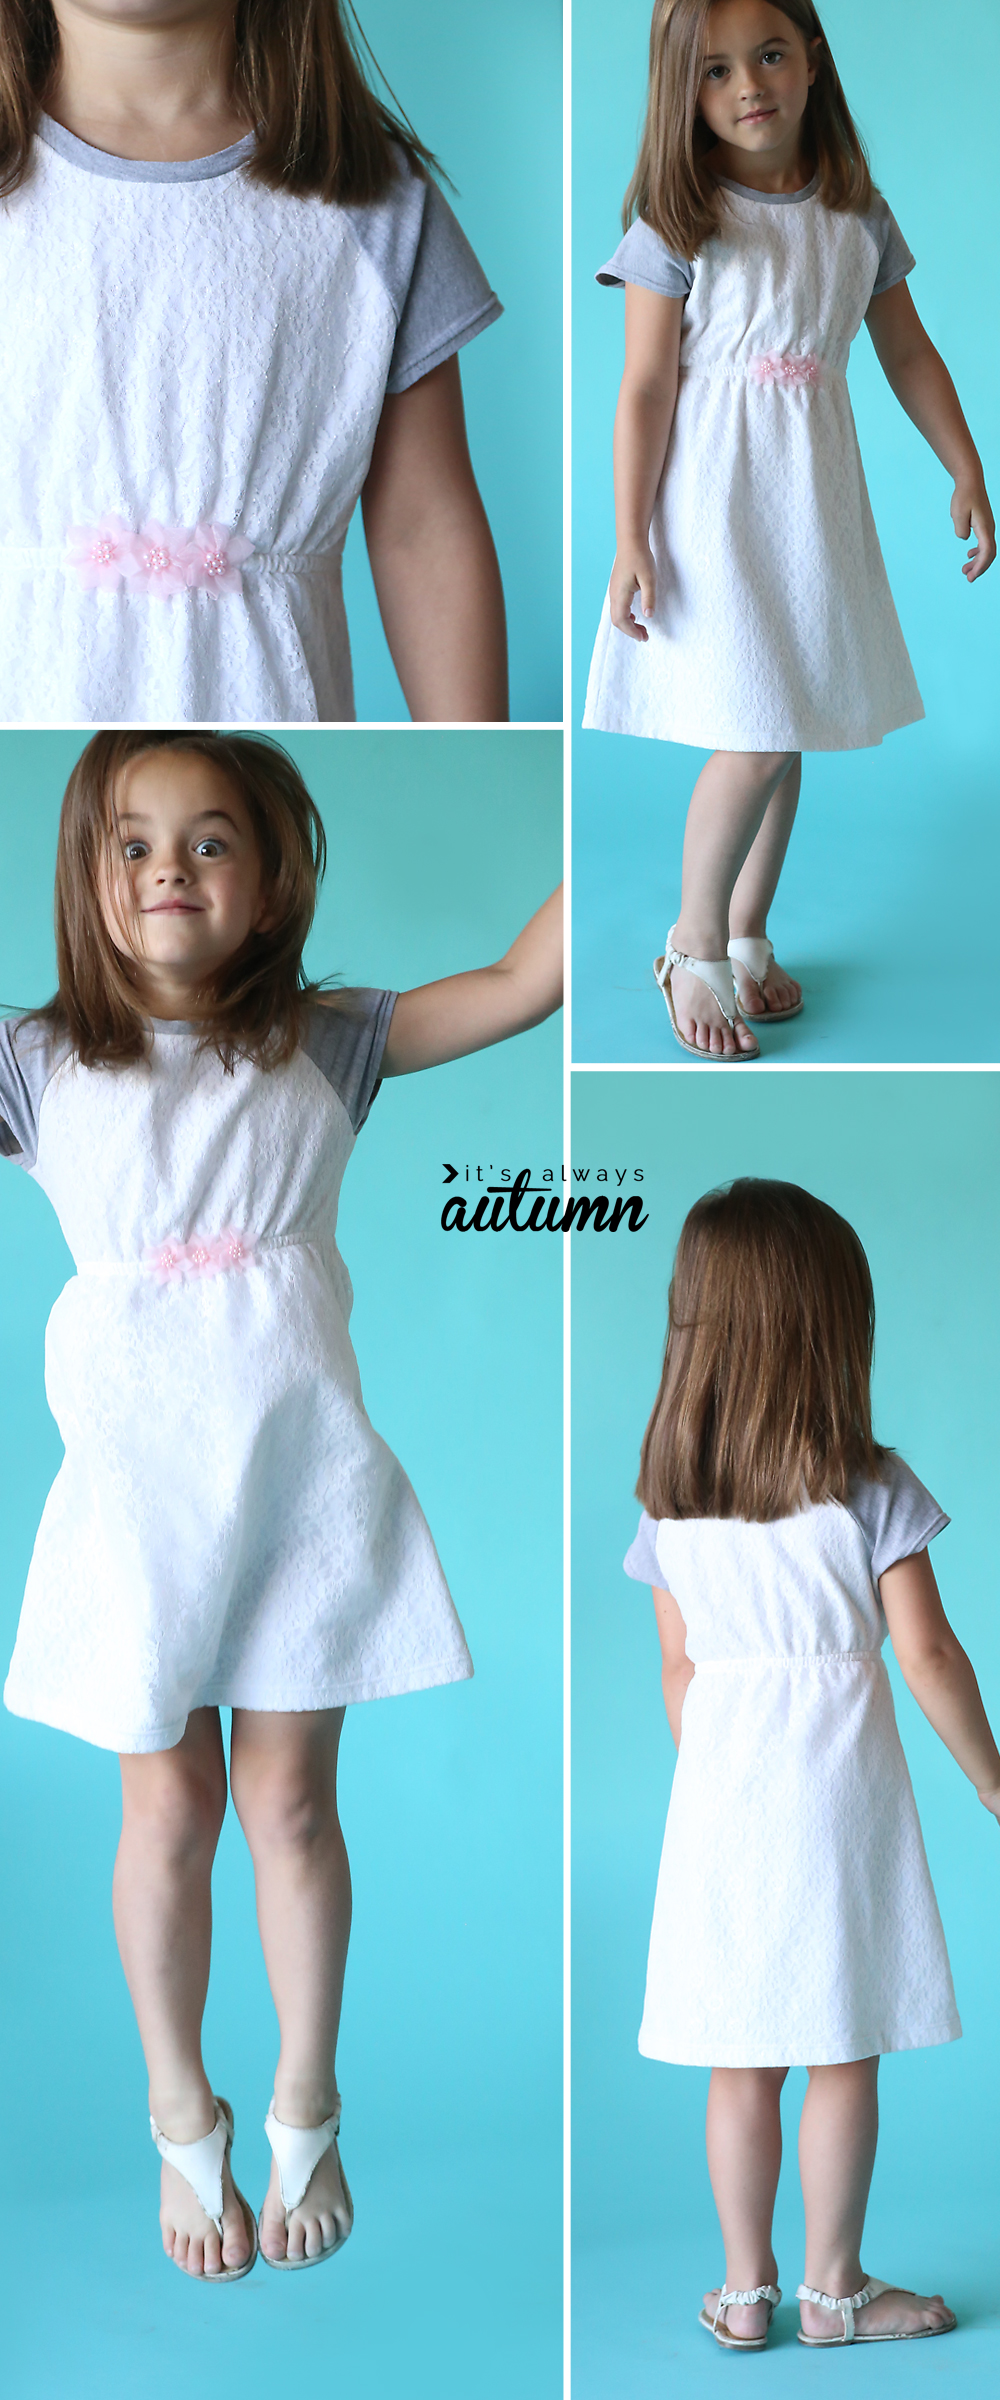 A little modeling a play dress made from a free pdf sewing pattern